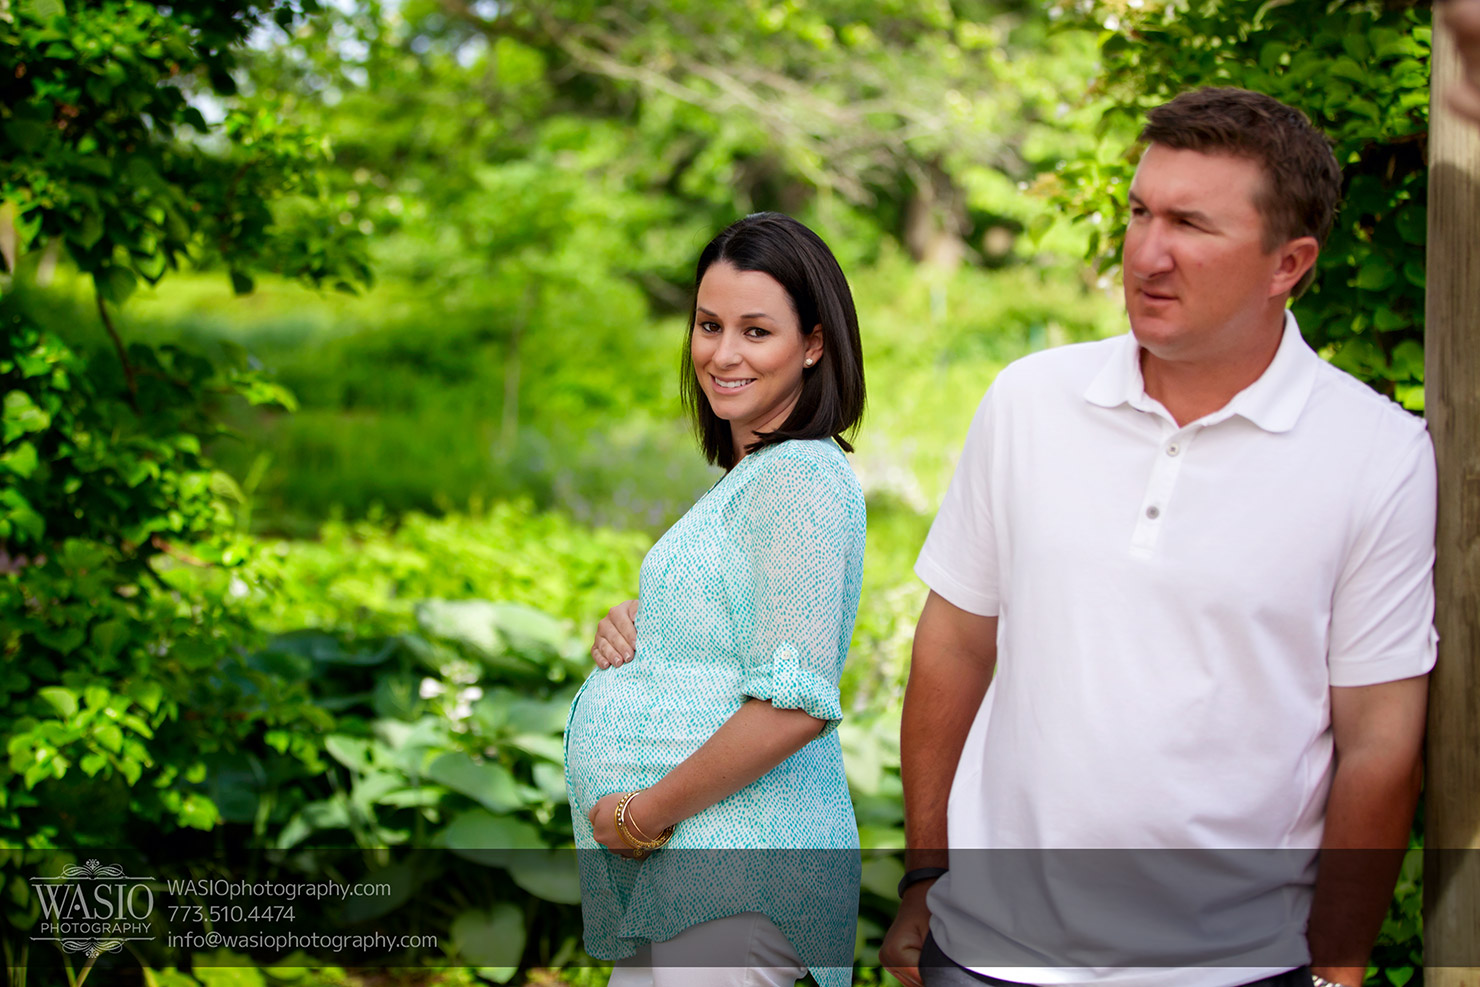 Maternity Photography Session